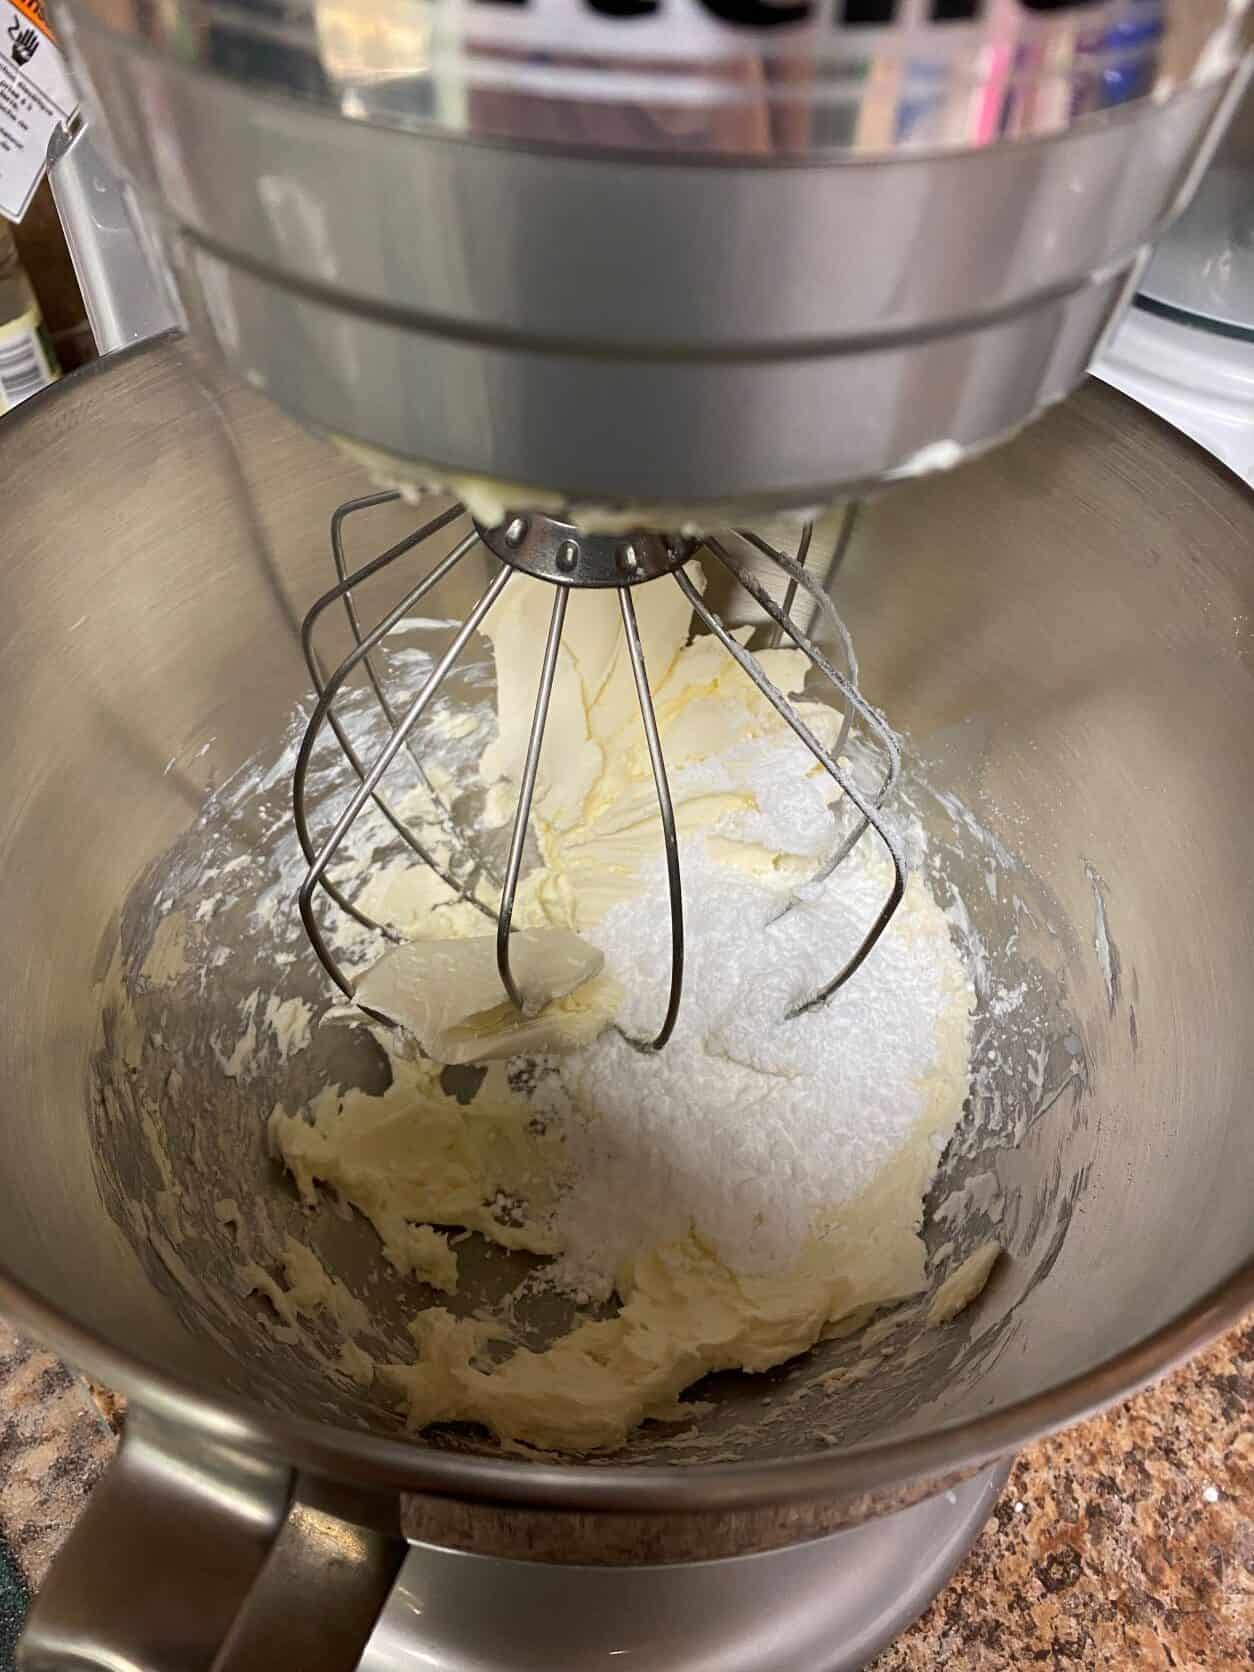 Cream cheese and powdered sugar in a mixing bowl